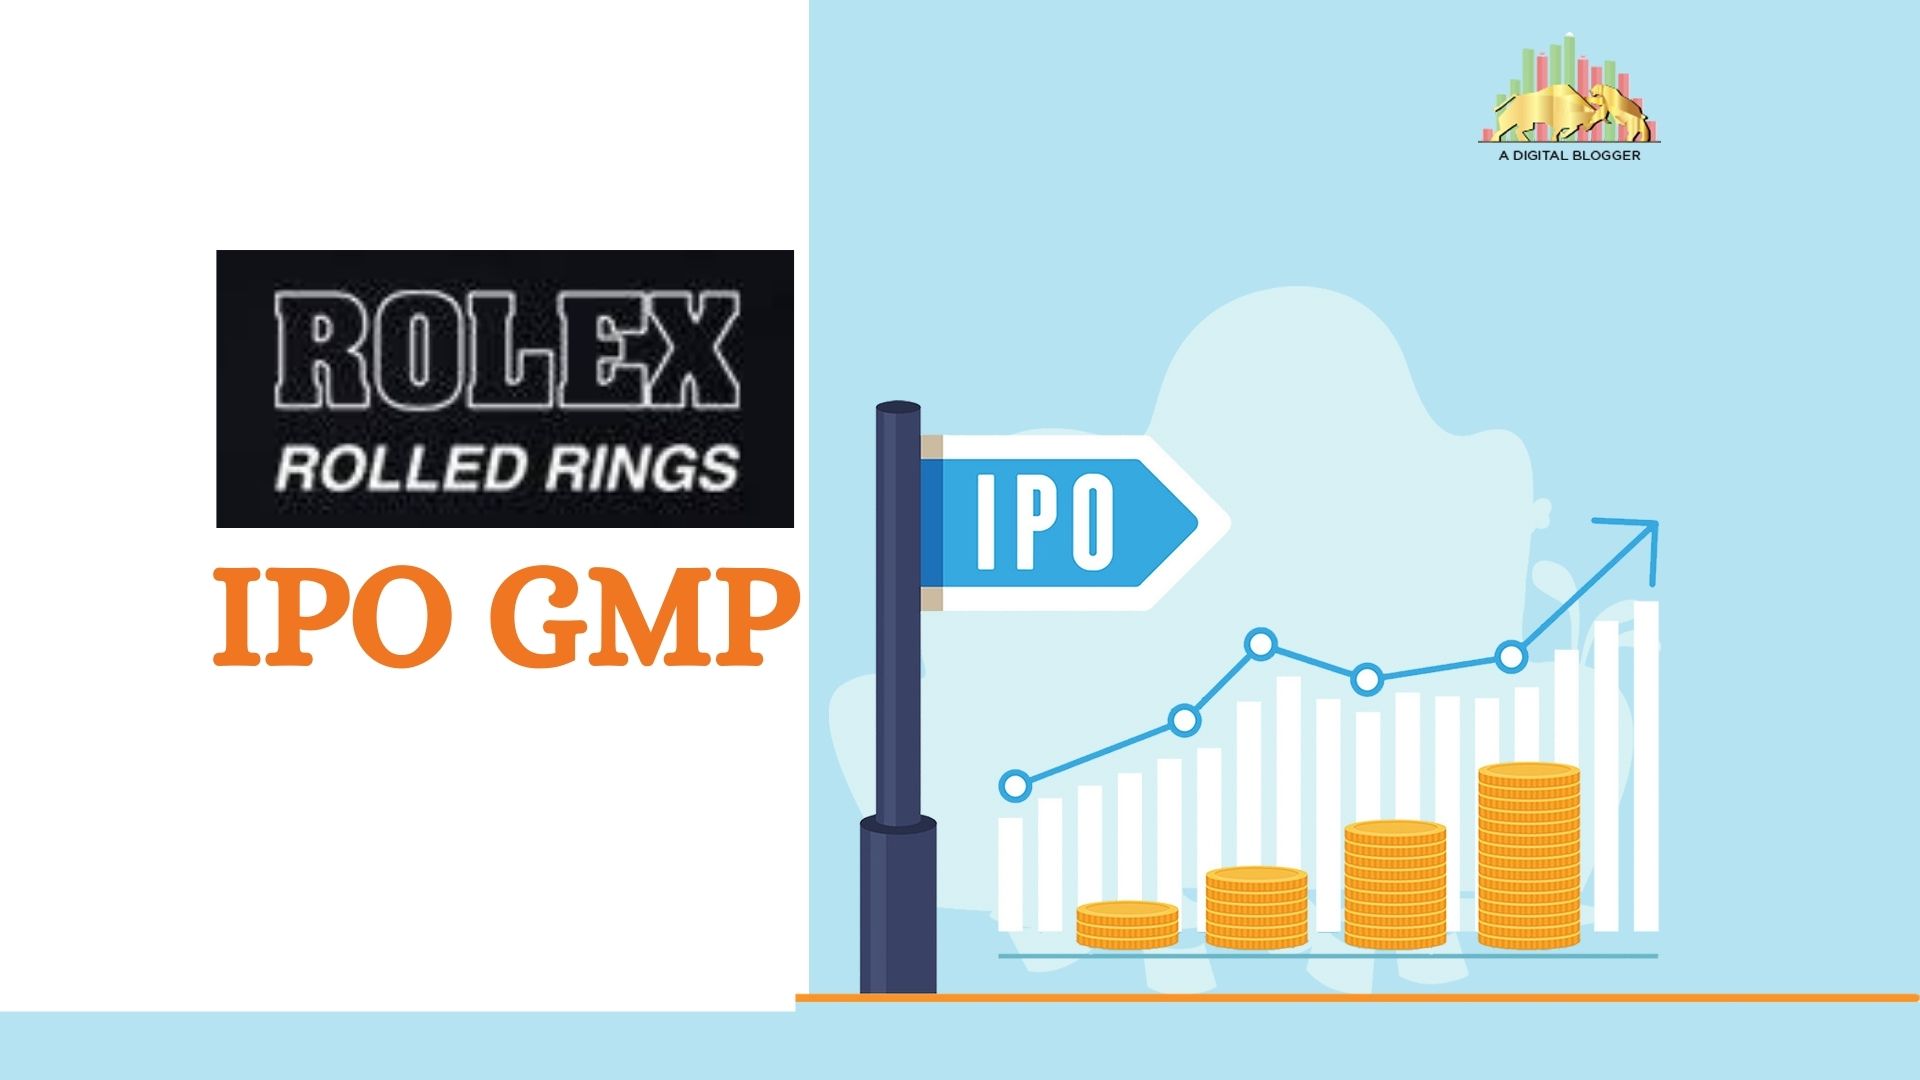 Rolex Rolled Rings IPO 🔥 Rolex Rolled Rings IPO GMP 🎯 Upcoming IPO in  July 2021 💥 Latest IPO News - YouTube